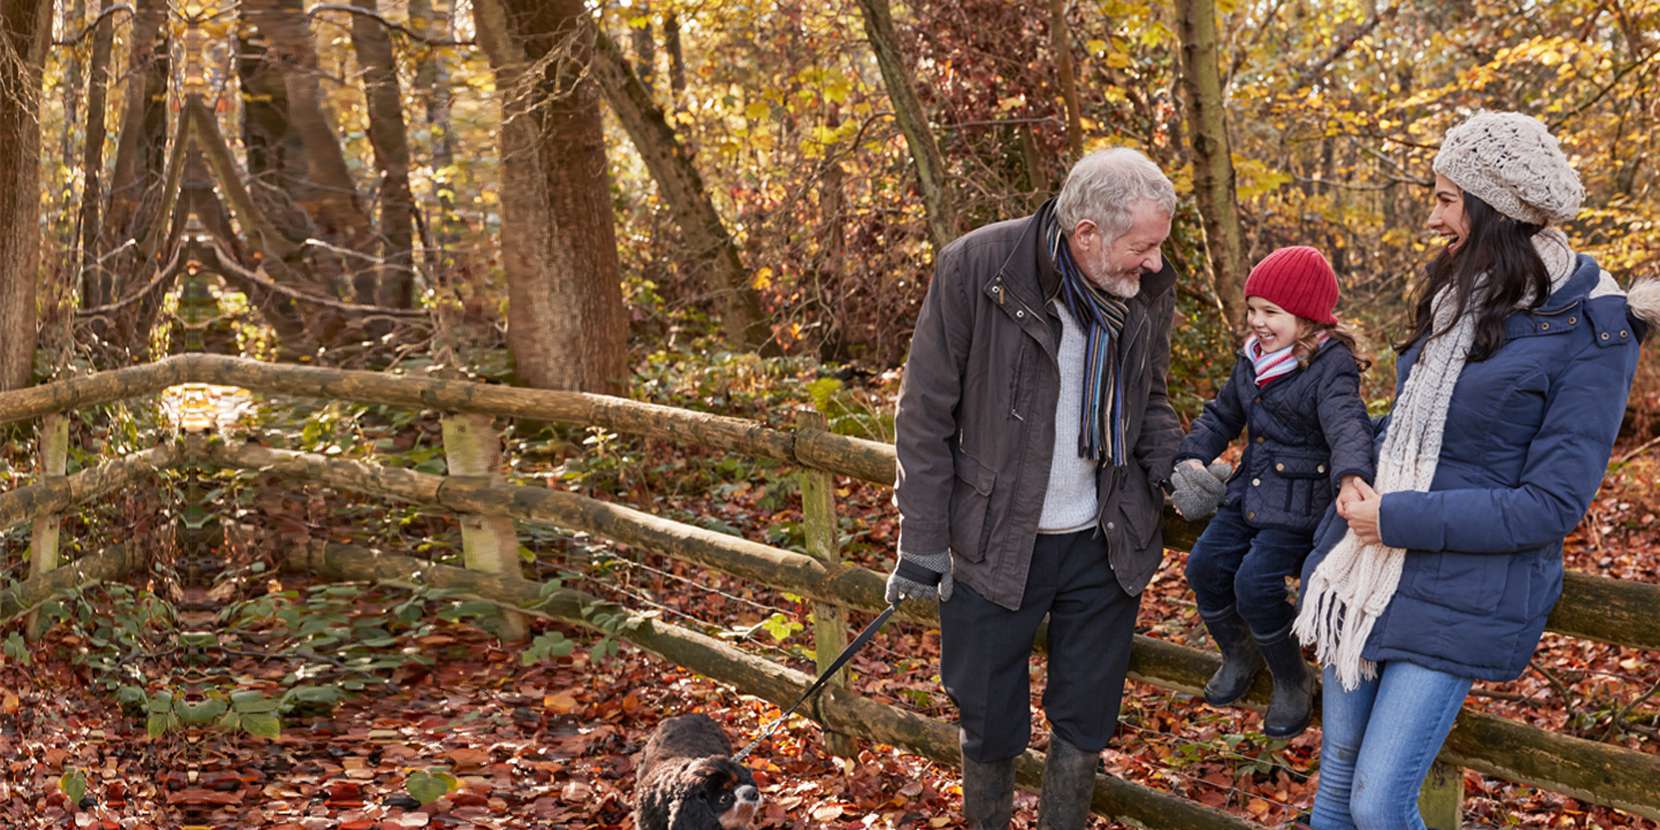 Mother child and granddad walking their dog on a leafy path. Family law solicitors, Family Law, Cohabitation